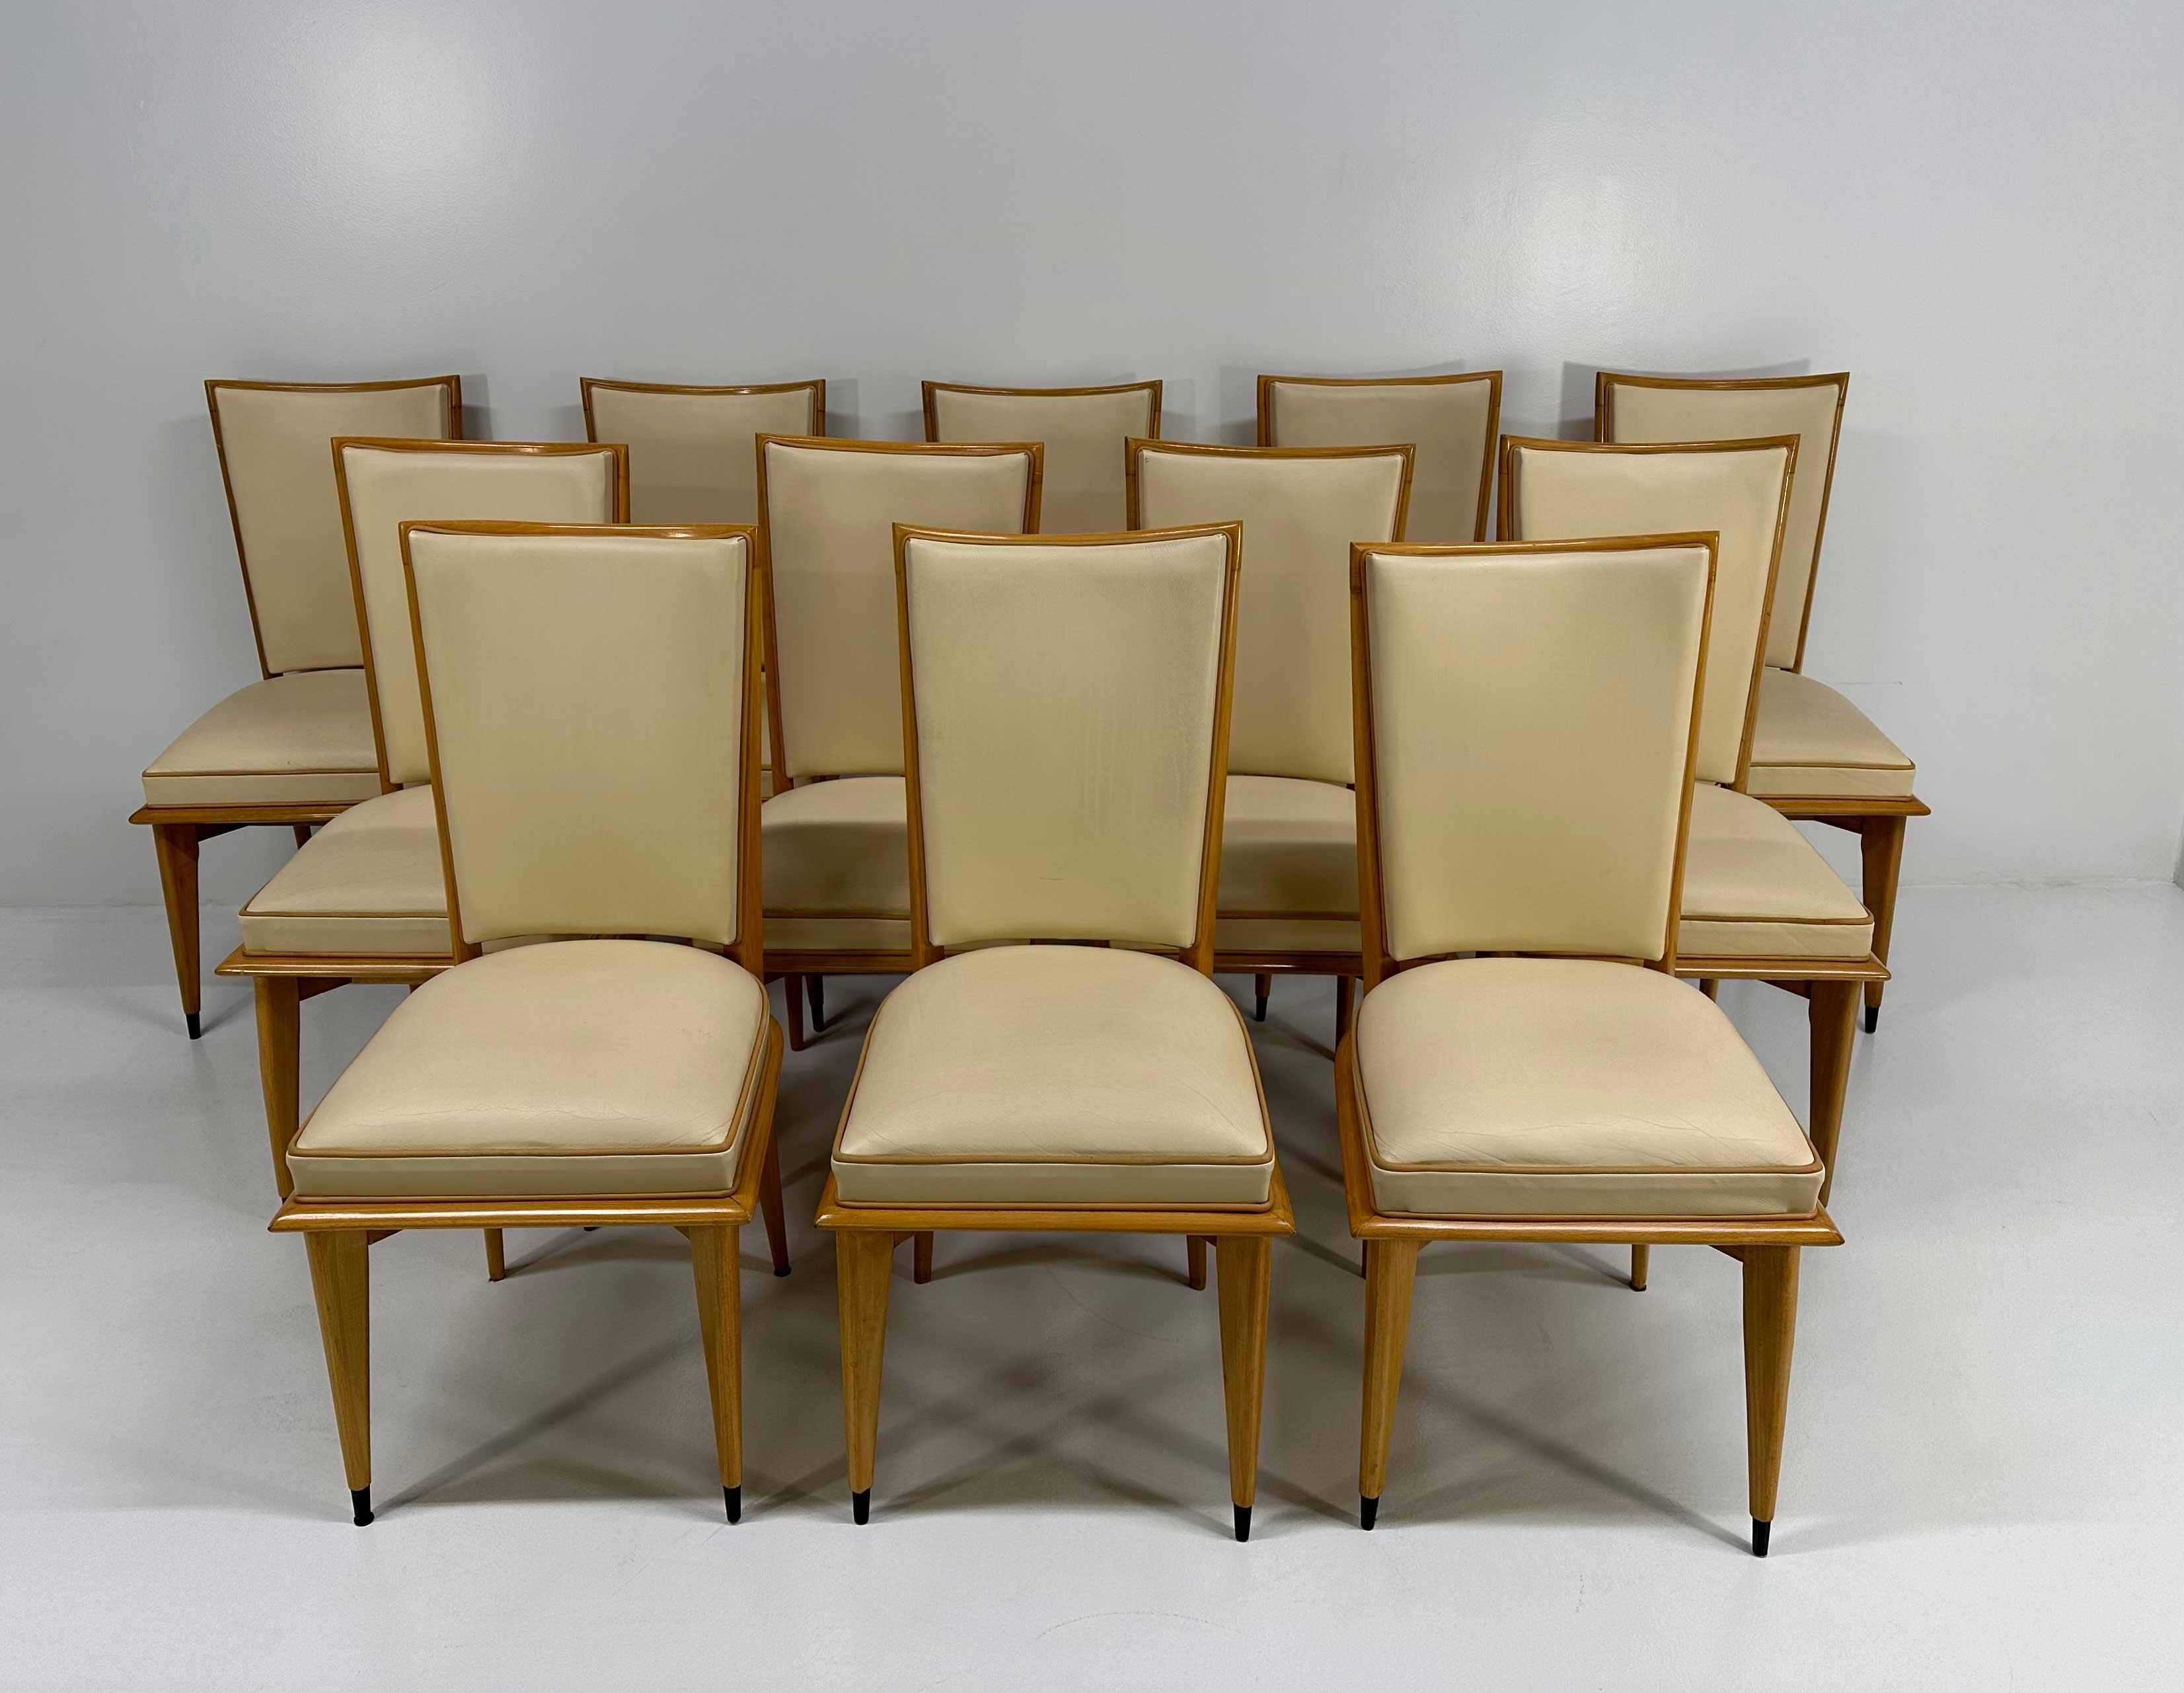 This set of 12 Art Deco chairs was produced in France in the 1930s. They have a maple structure and are upholstered with two different color of leather: cream and light brown for the profiles. 
The tips of the legs are black lacquered.